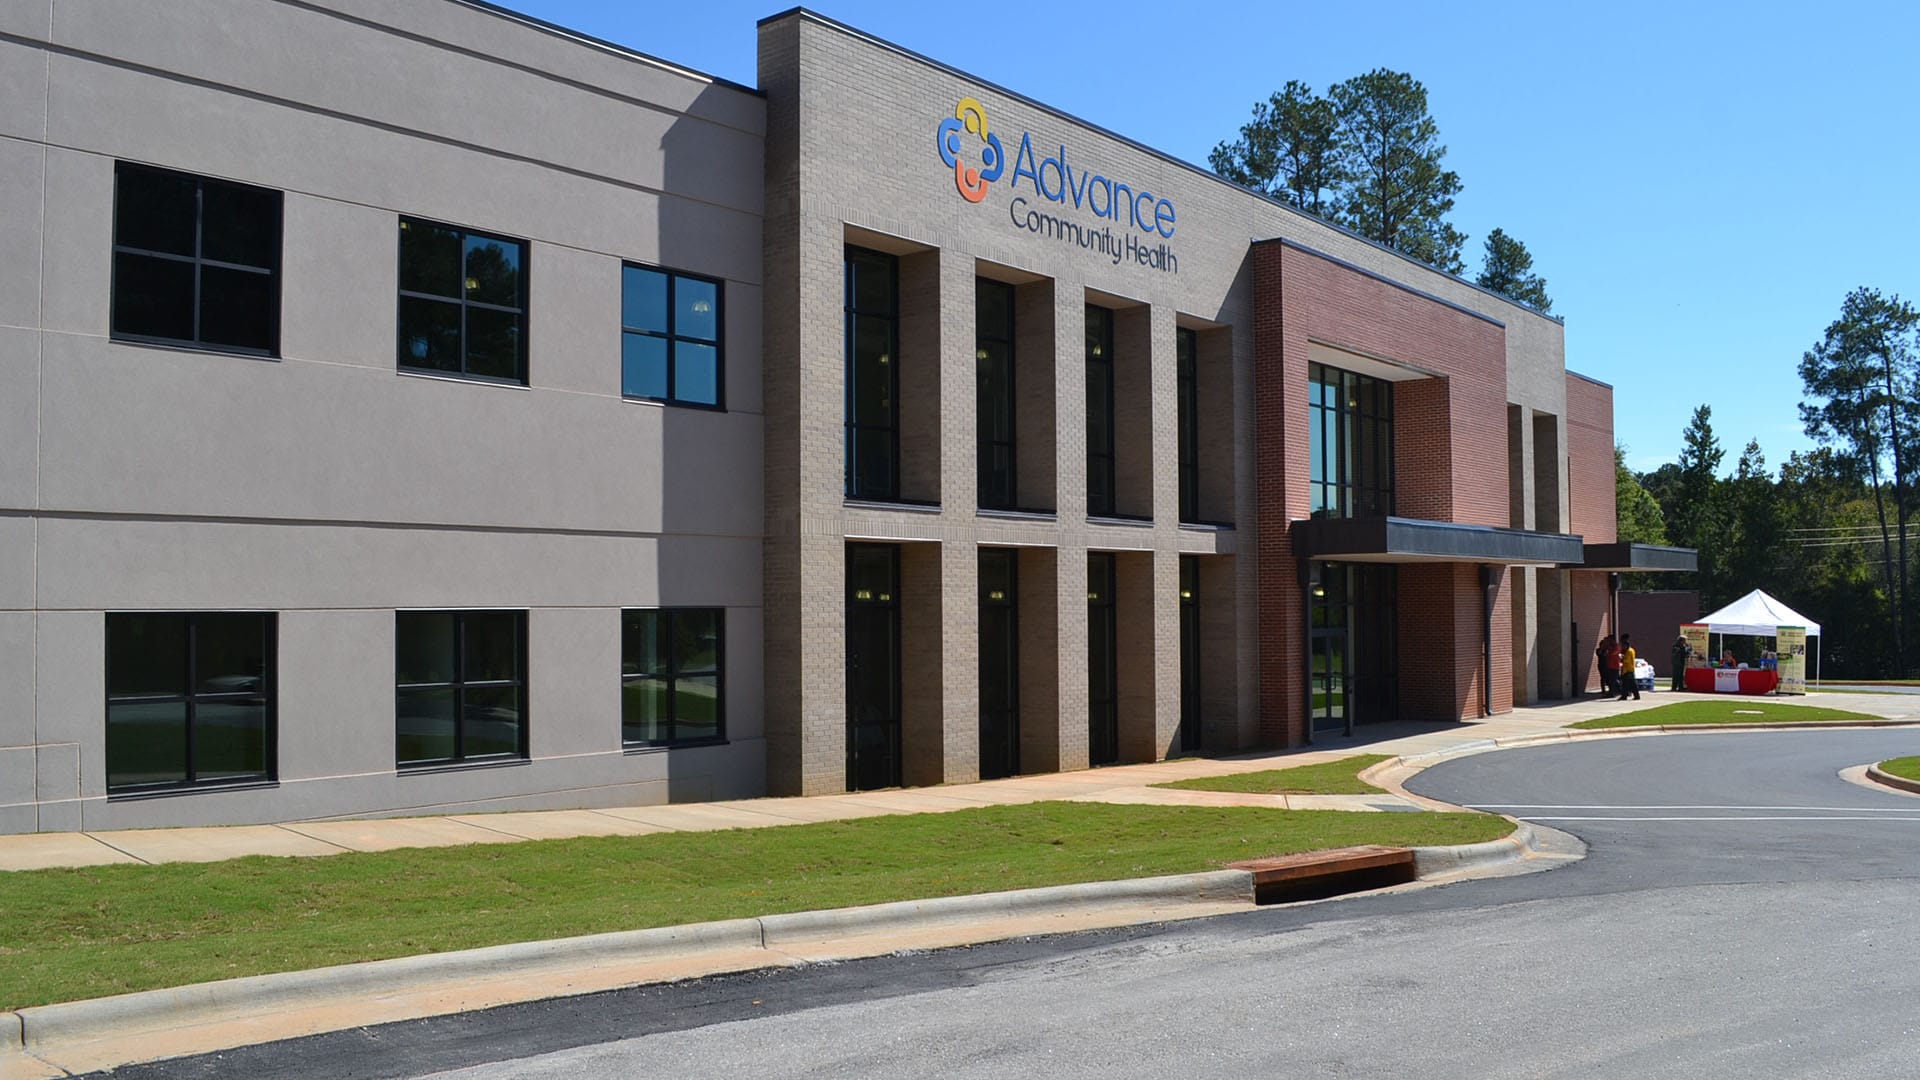 Advance Community Health southeast Raleigh building on a sunny day